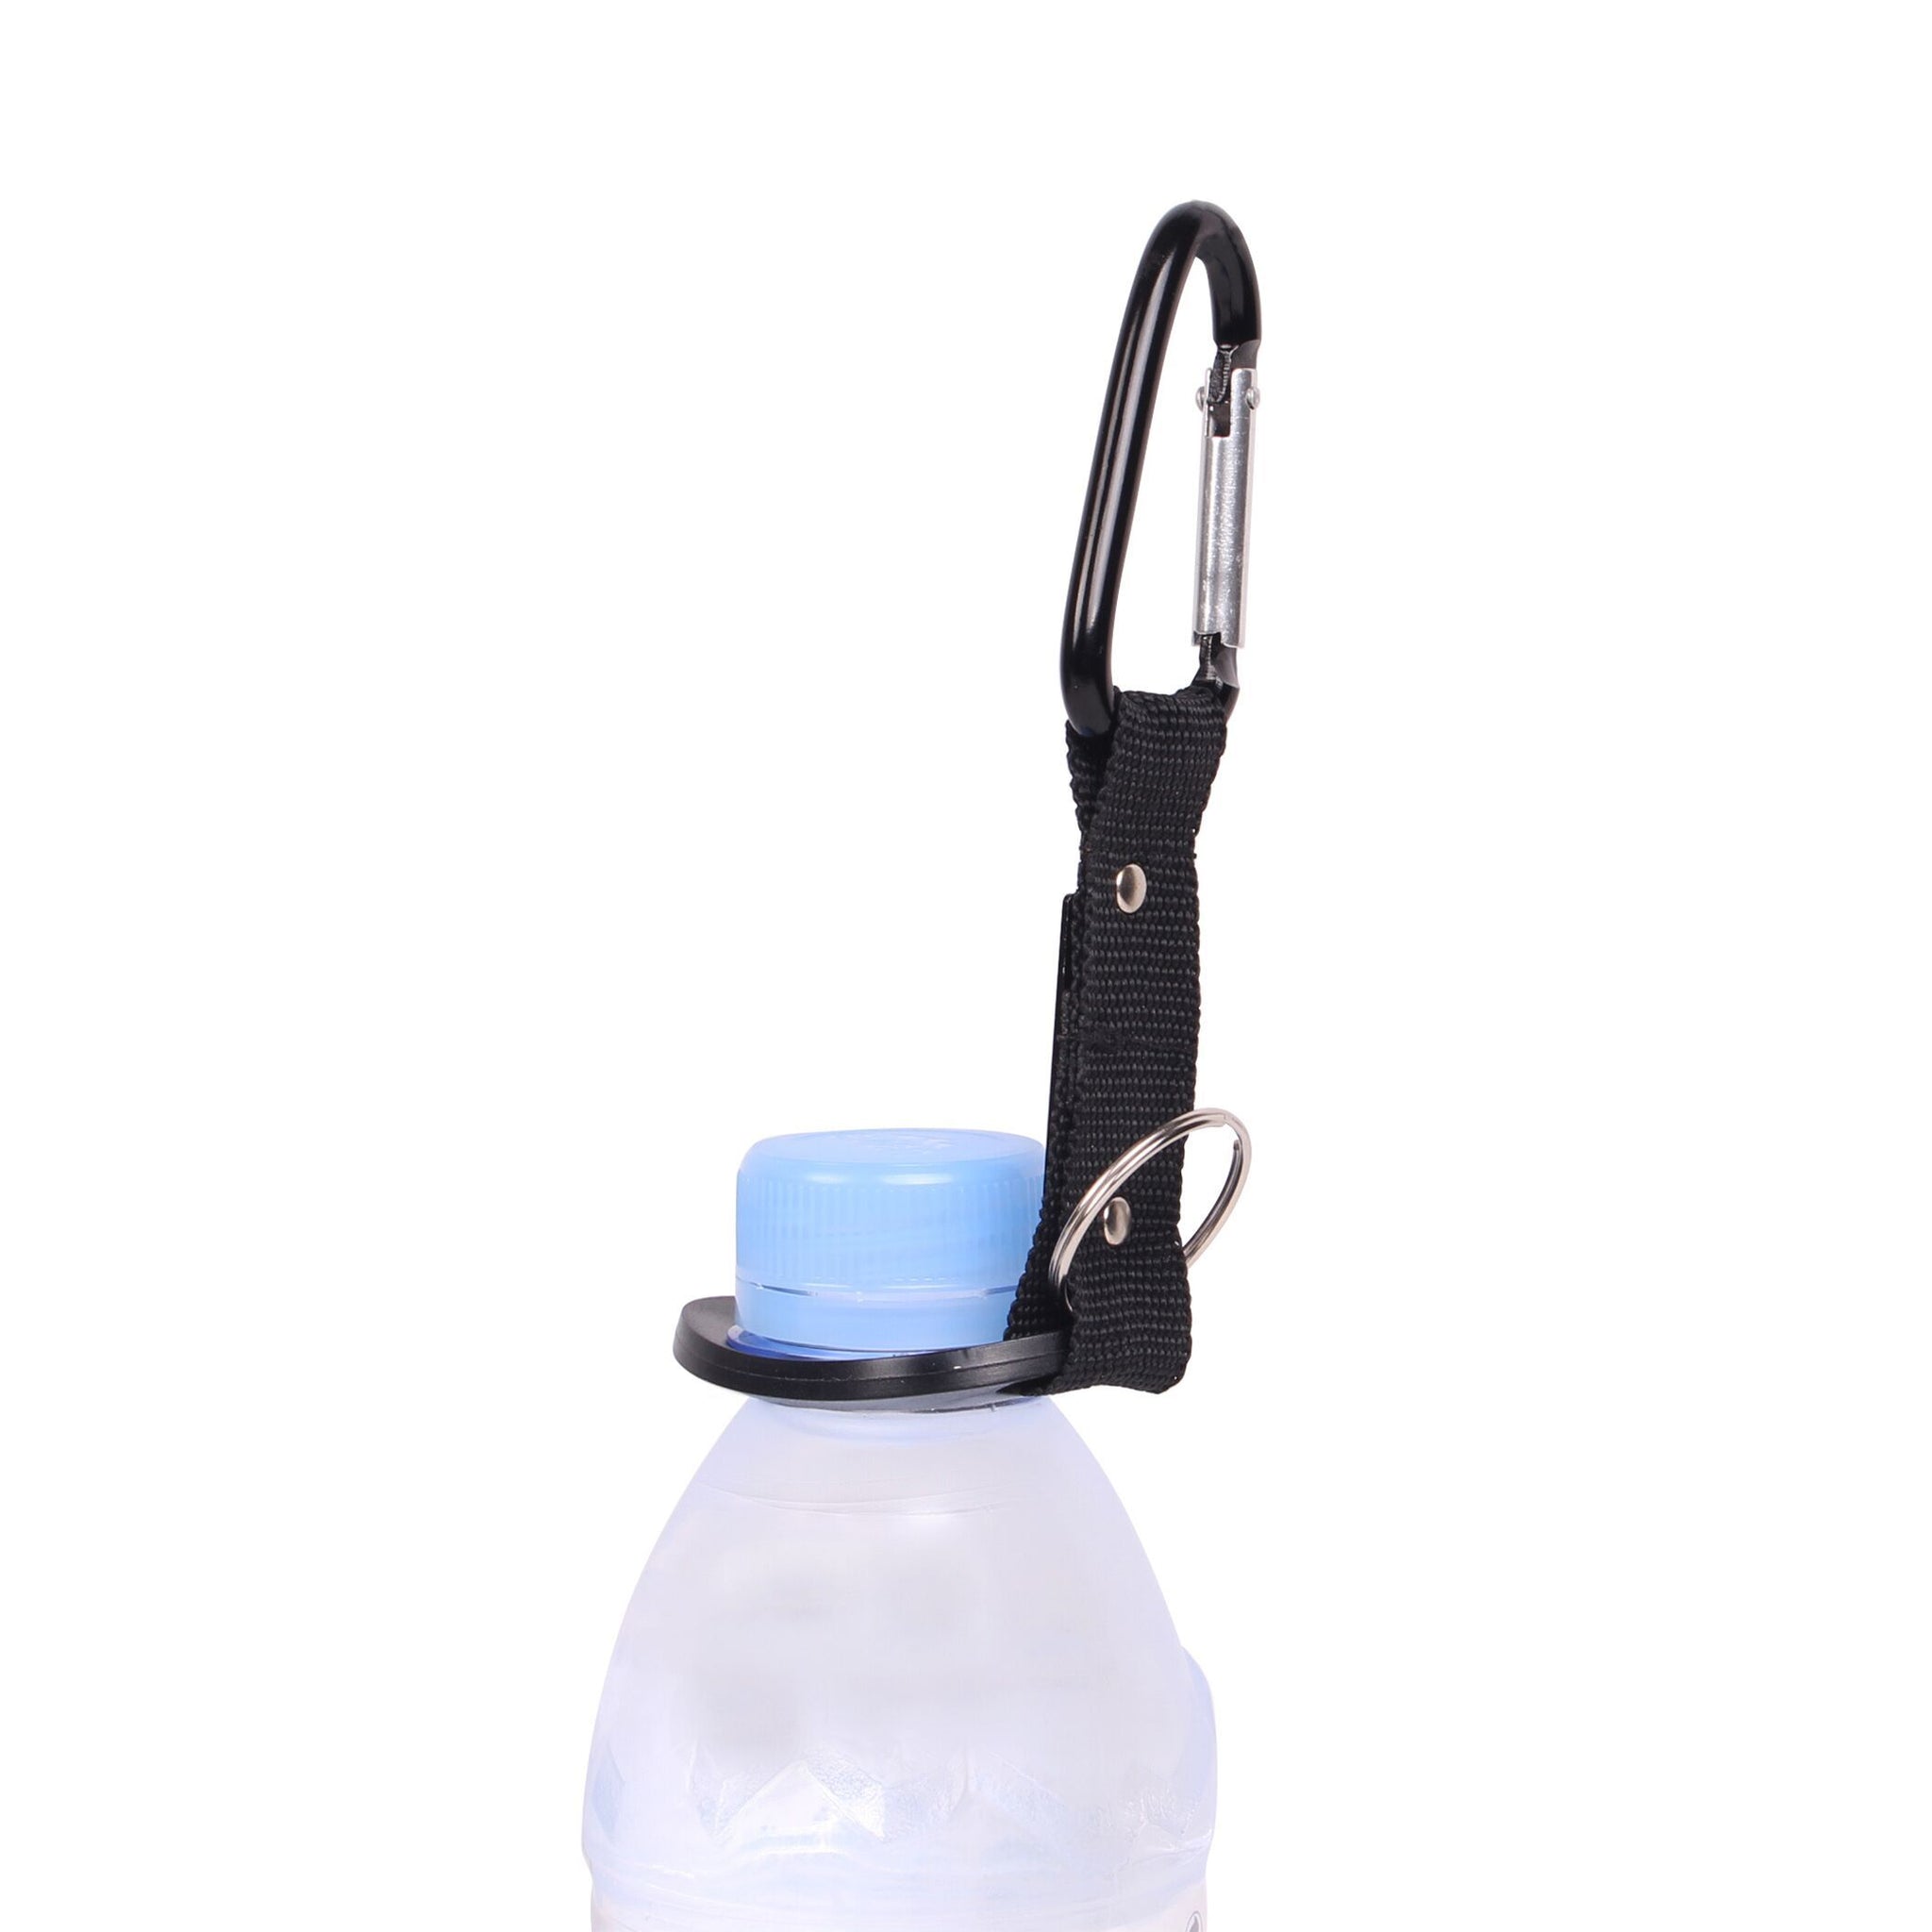 Small water bottle swivel carabiner clip made in China